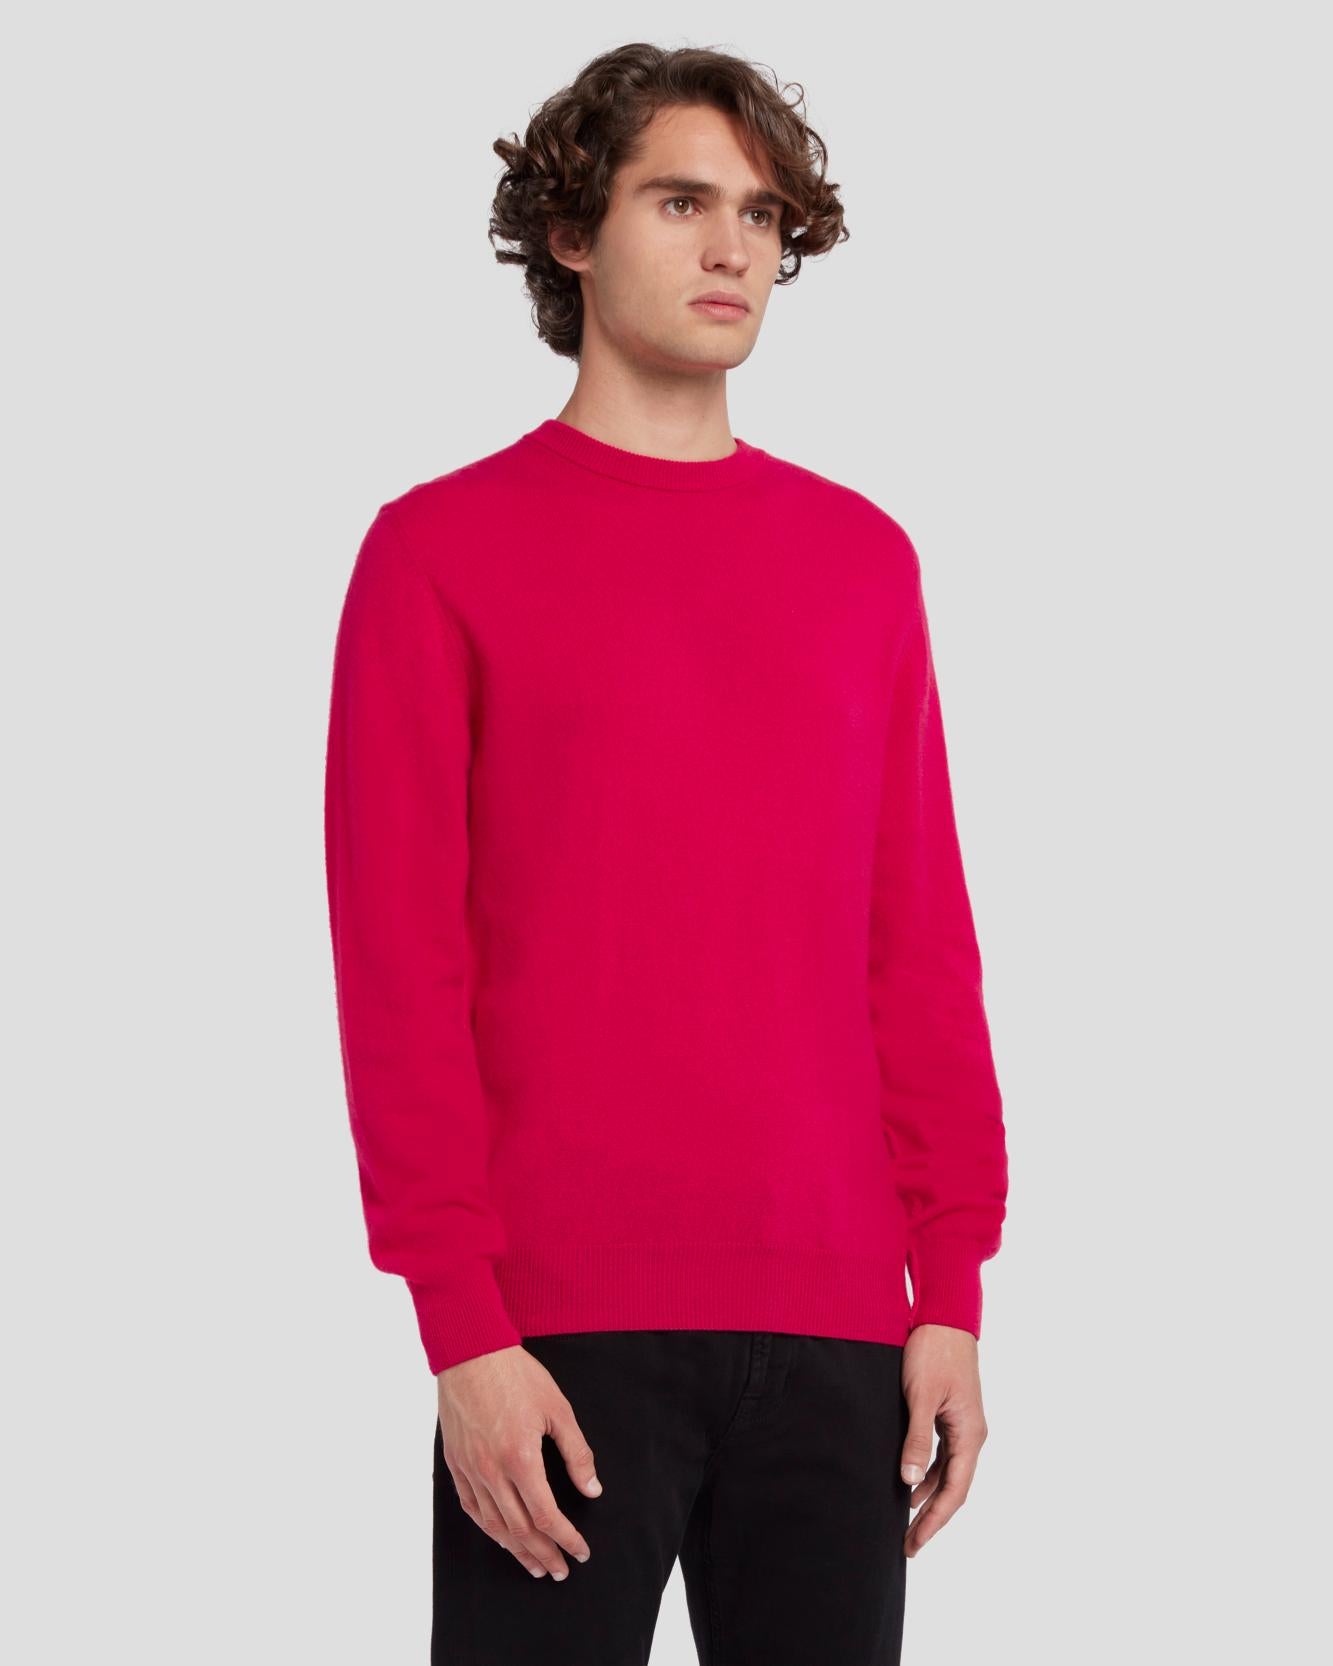 Cashmere Crew Sweater in Raspberry | 7 For All Mankind